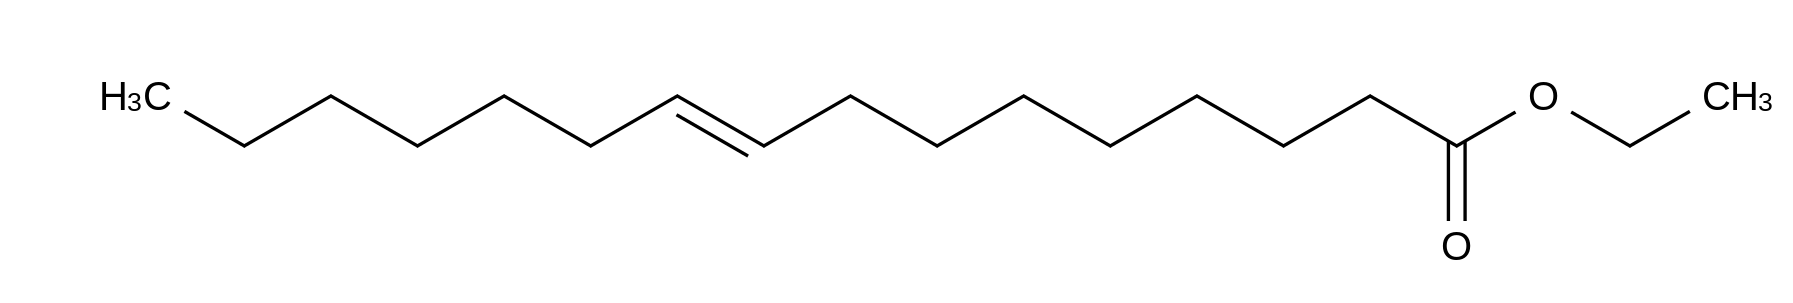 Ethyl Palmitoleate